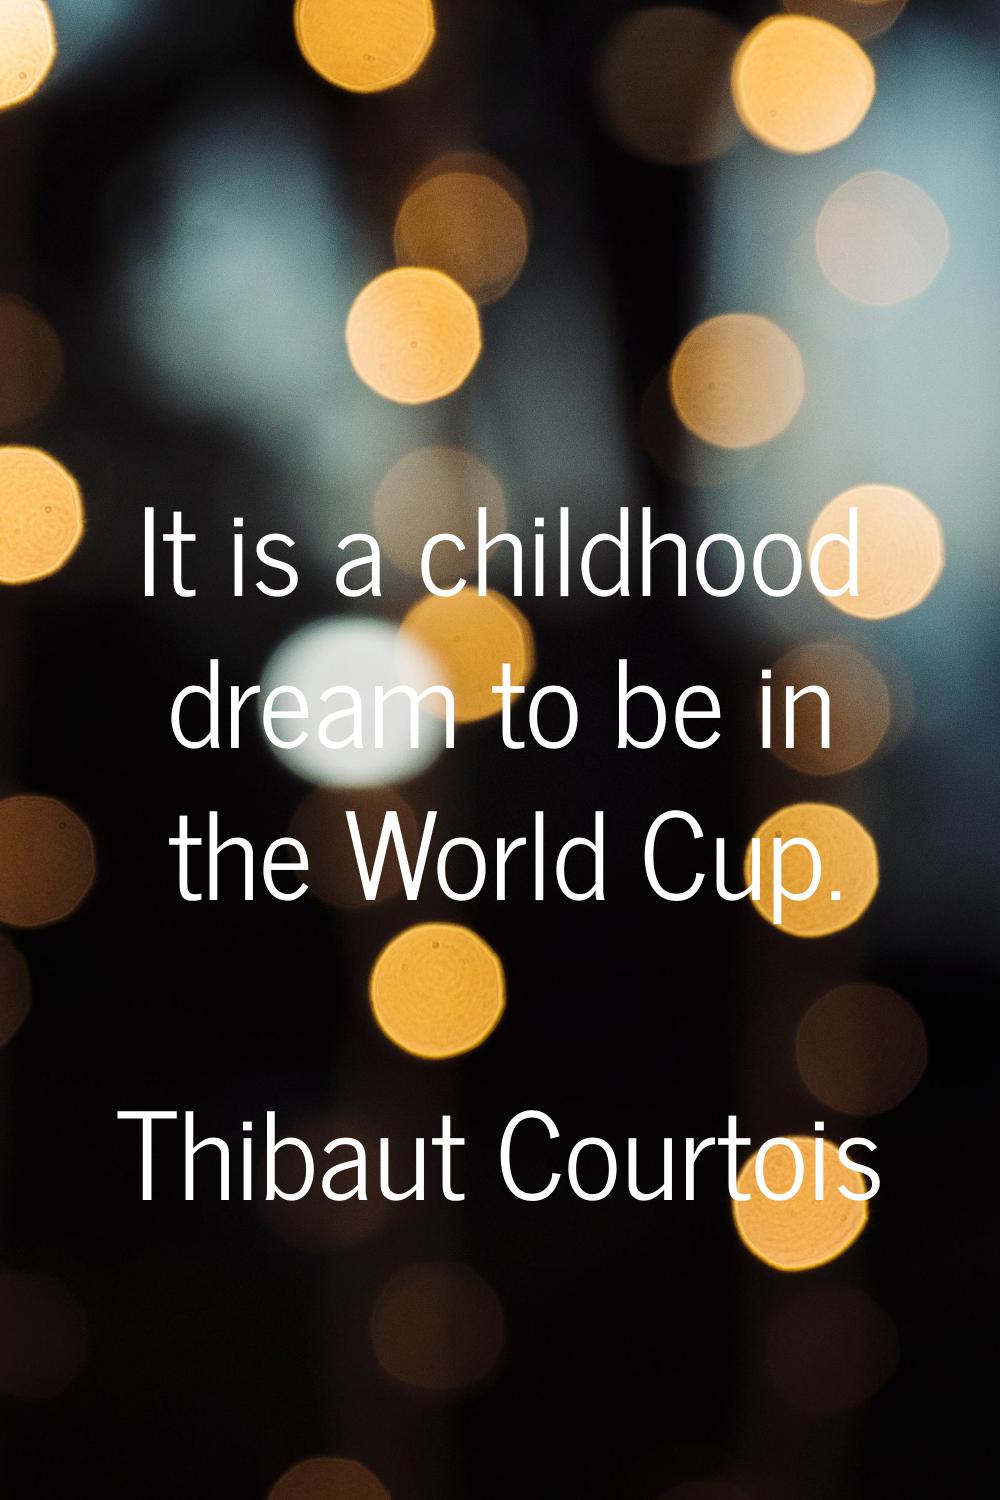 It is a childhood dream to be in the World Cup.